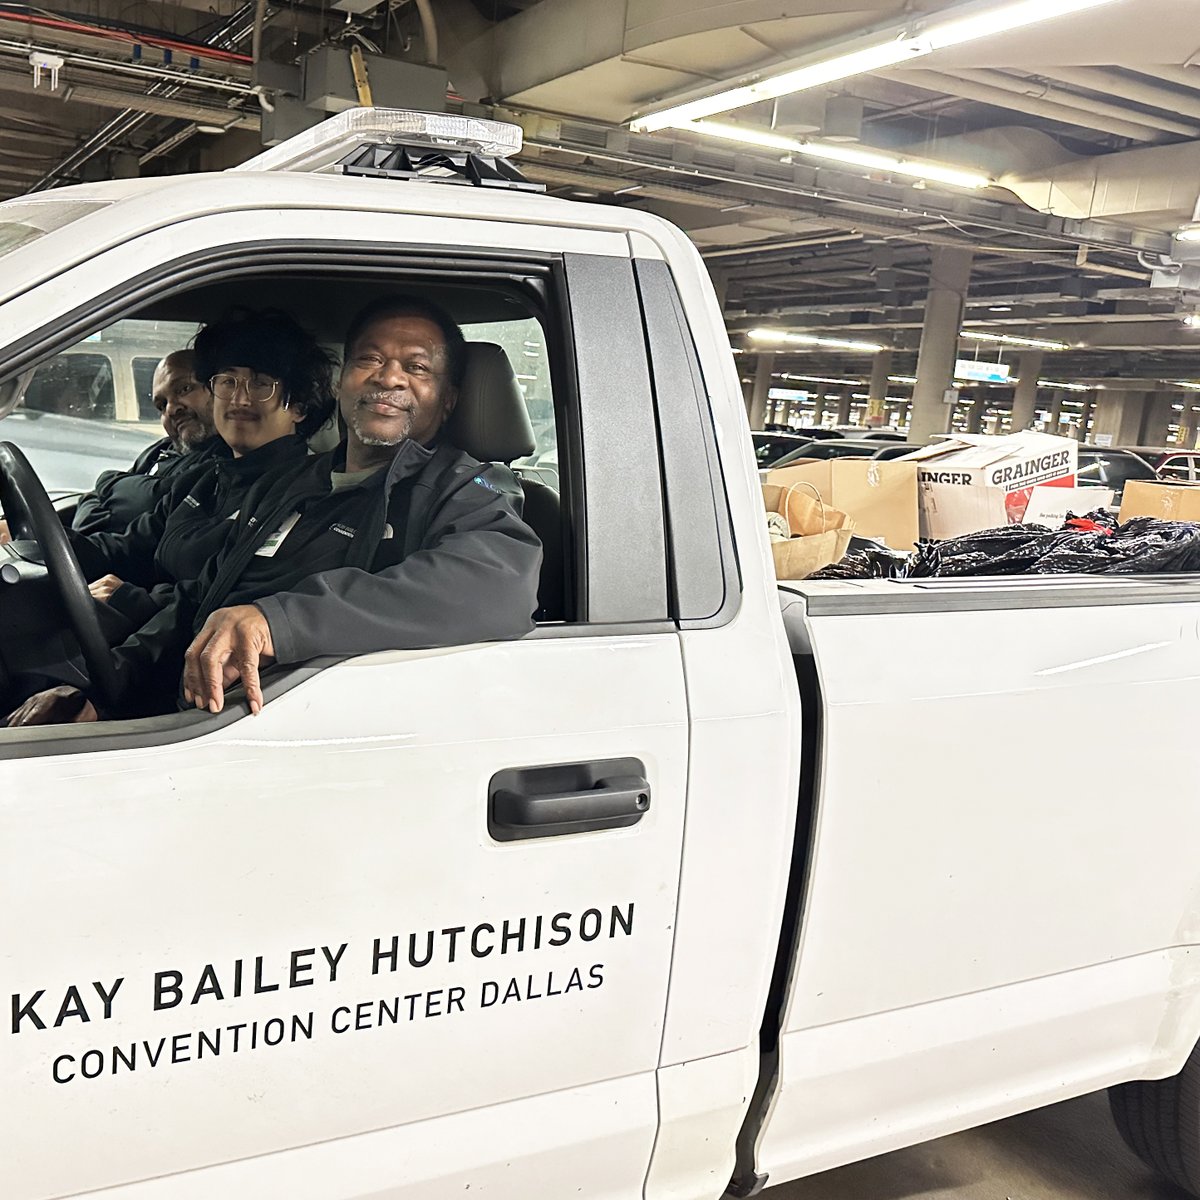 Celebrating #WomensHistoryMonth with style. Yesterday, #TeamKBHCCD filled a whole truck 🚚 with women's, men’s and children's clothing donations for @DallasLIFE! What a strong finish to the month! 💪👏